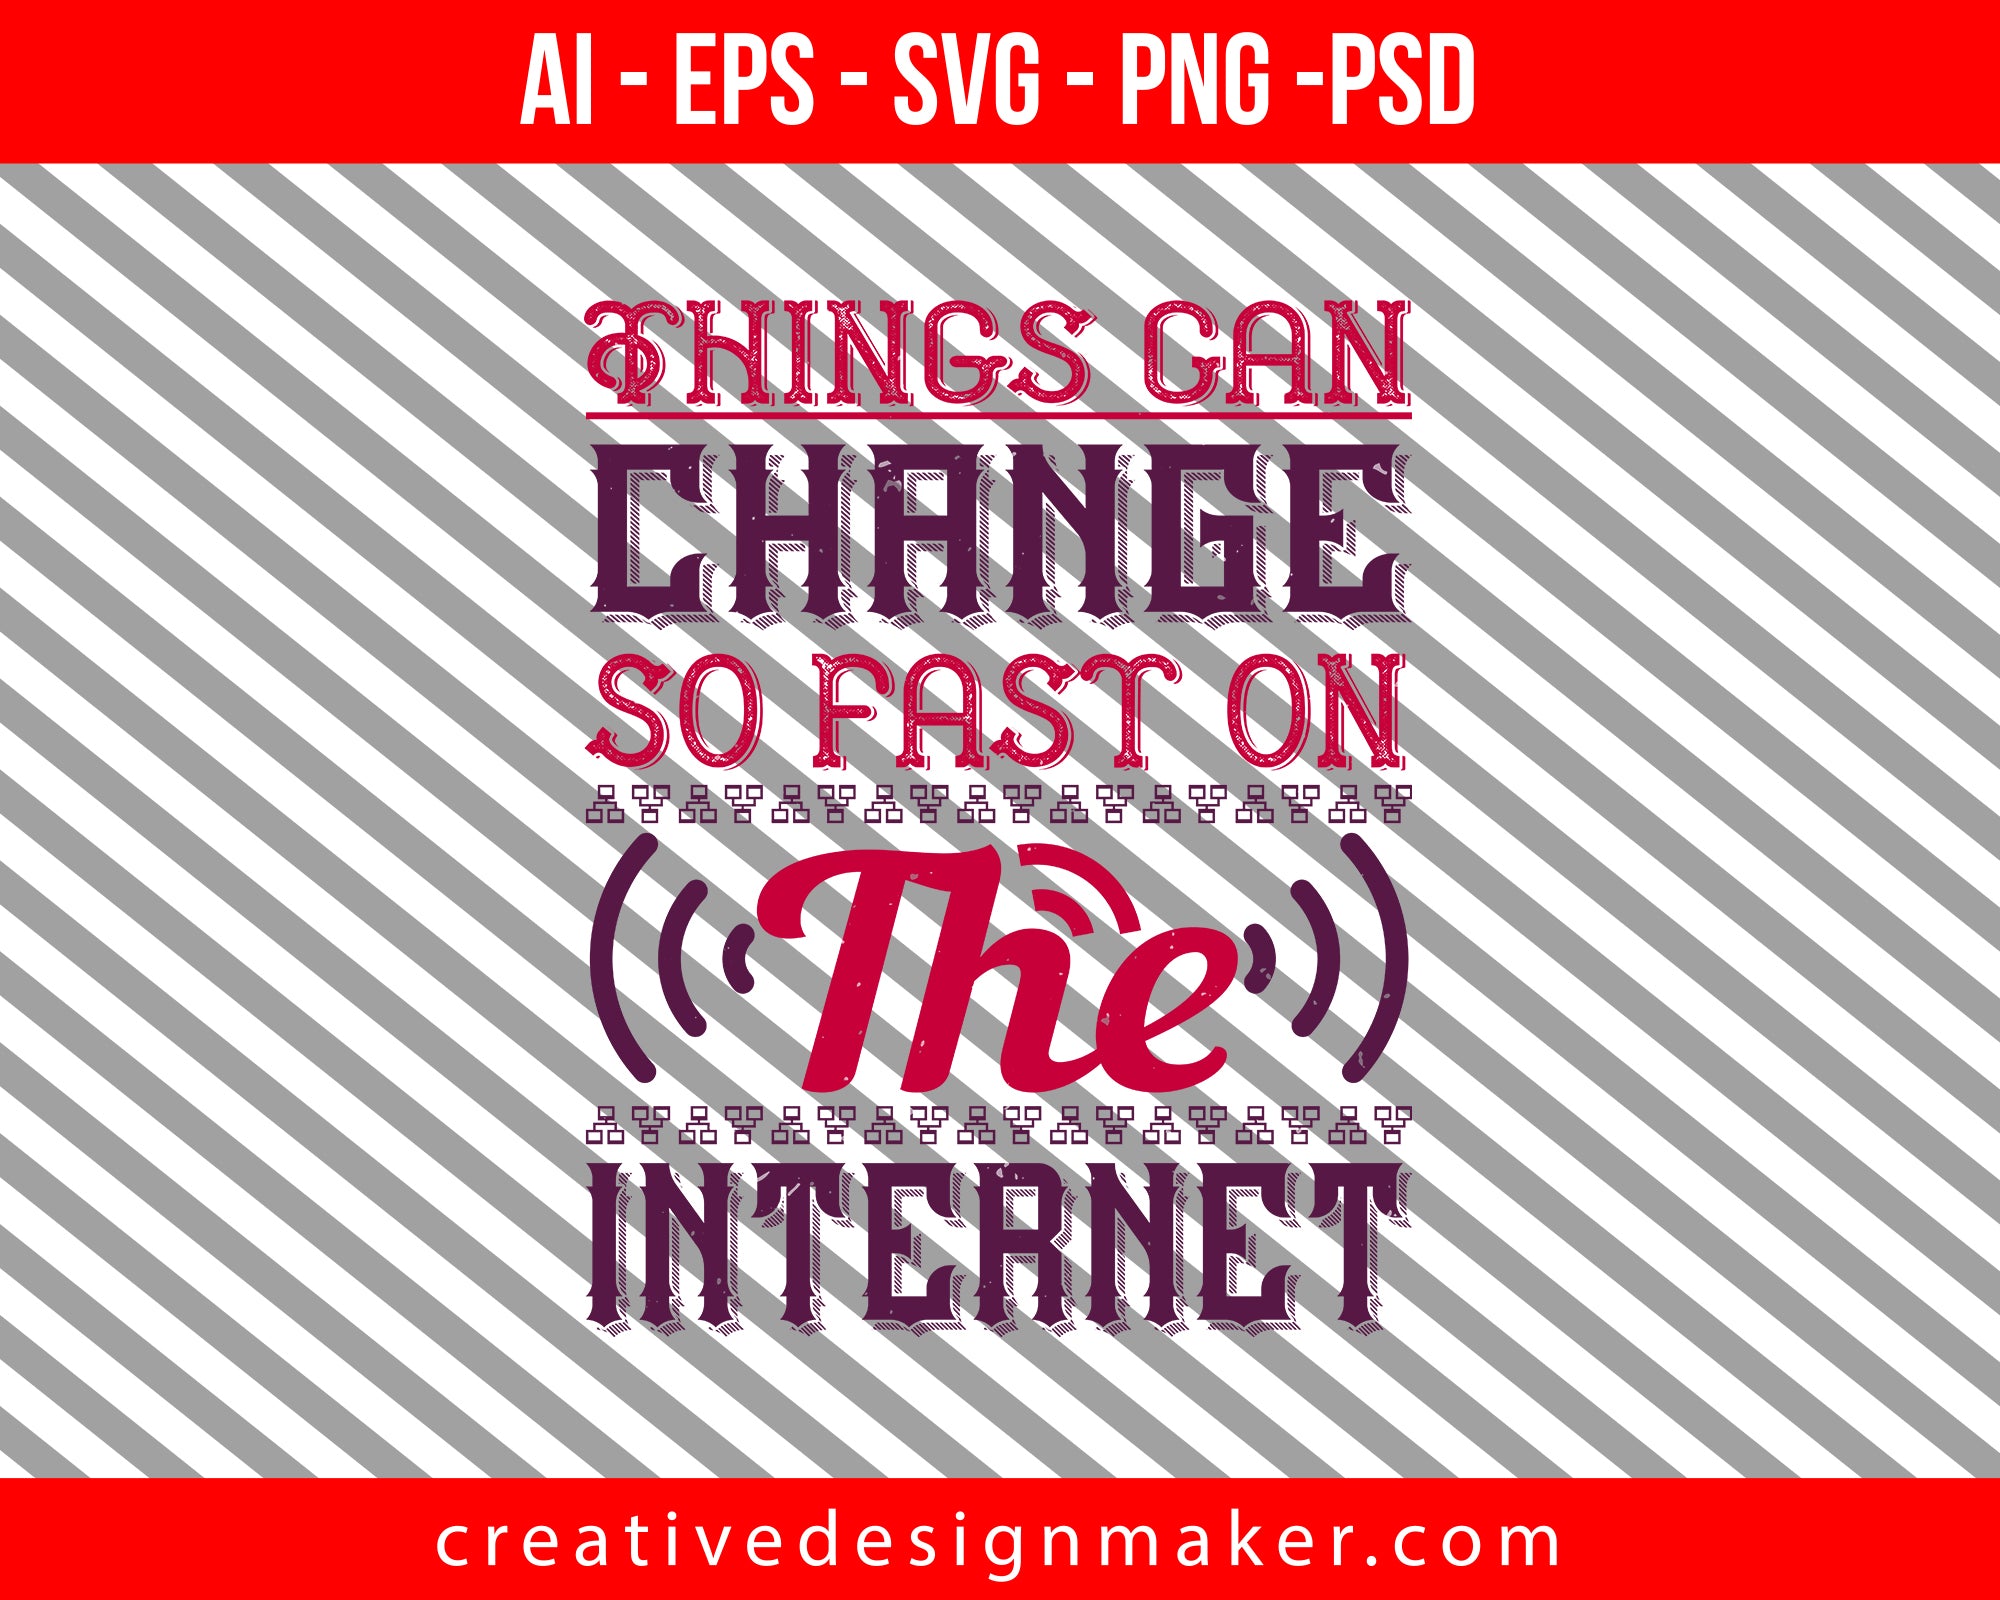 Things can change so fast on the Internet Print Ready Editable T-Shirt SVG Design!